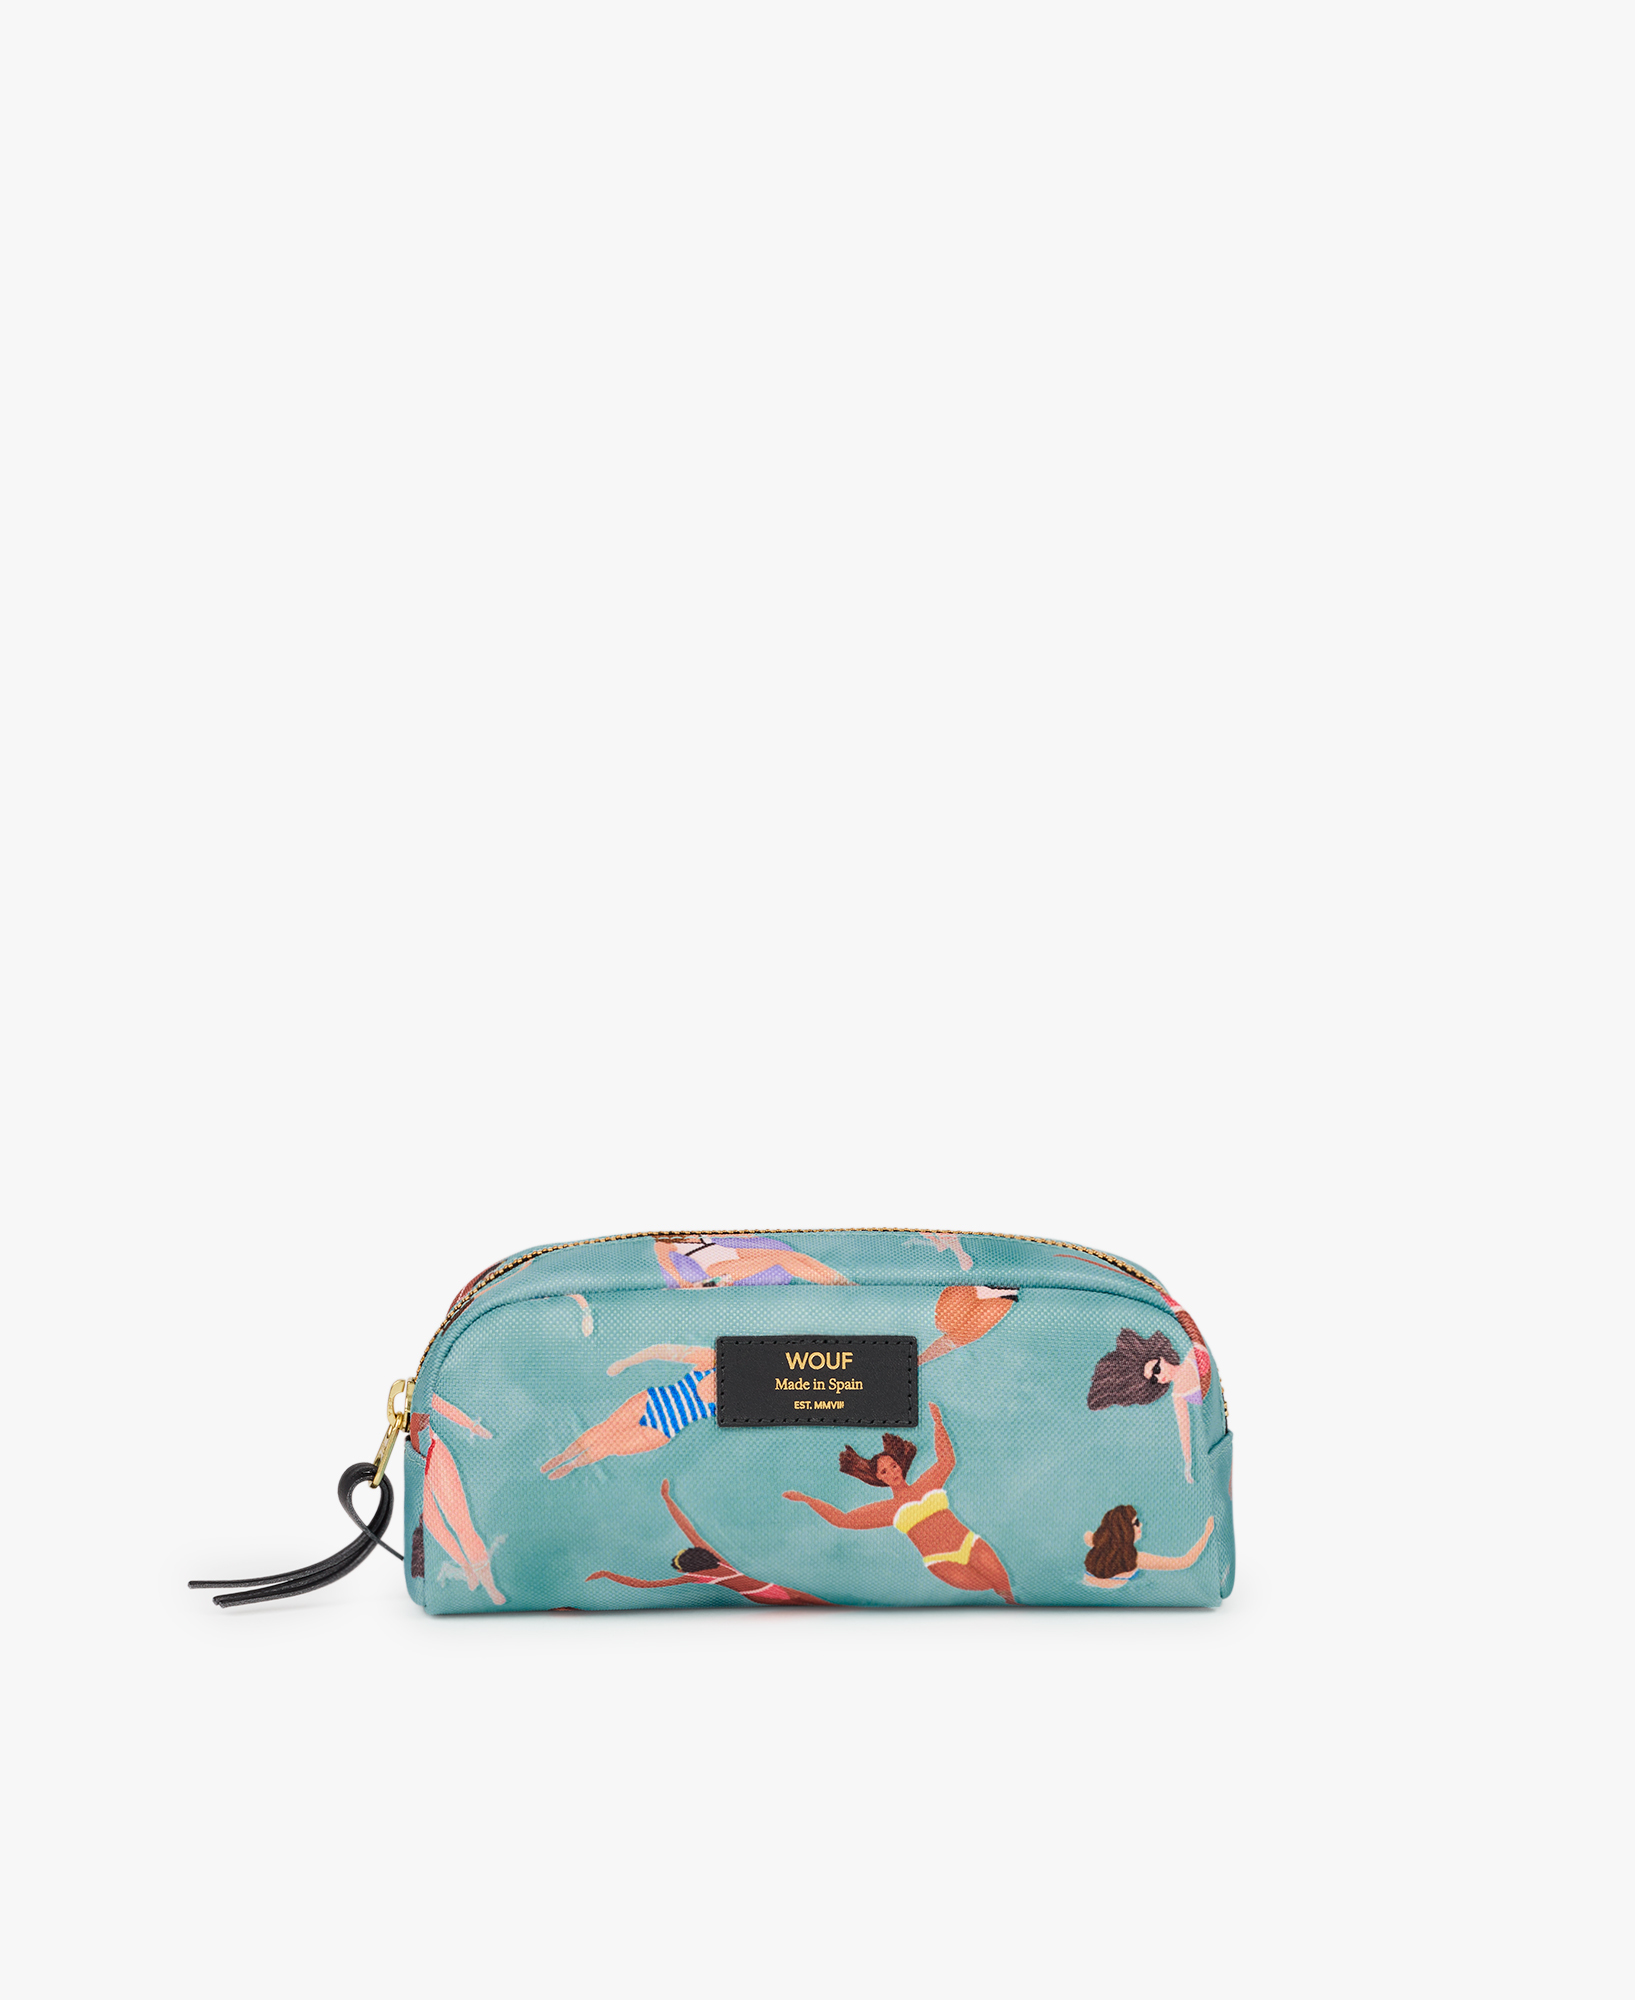 WOUF-Small-Makeup-Bag-Swimmers-Front